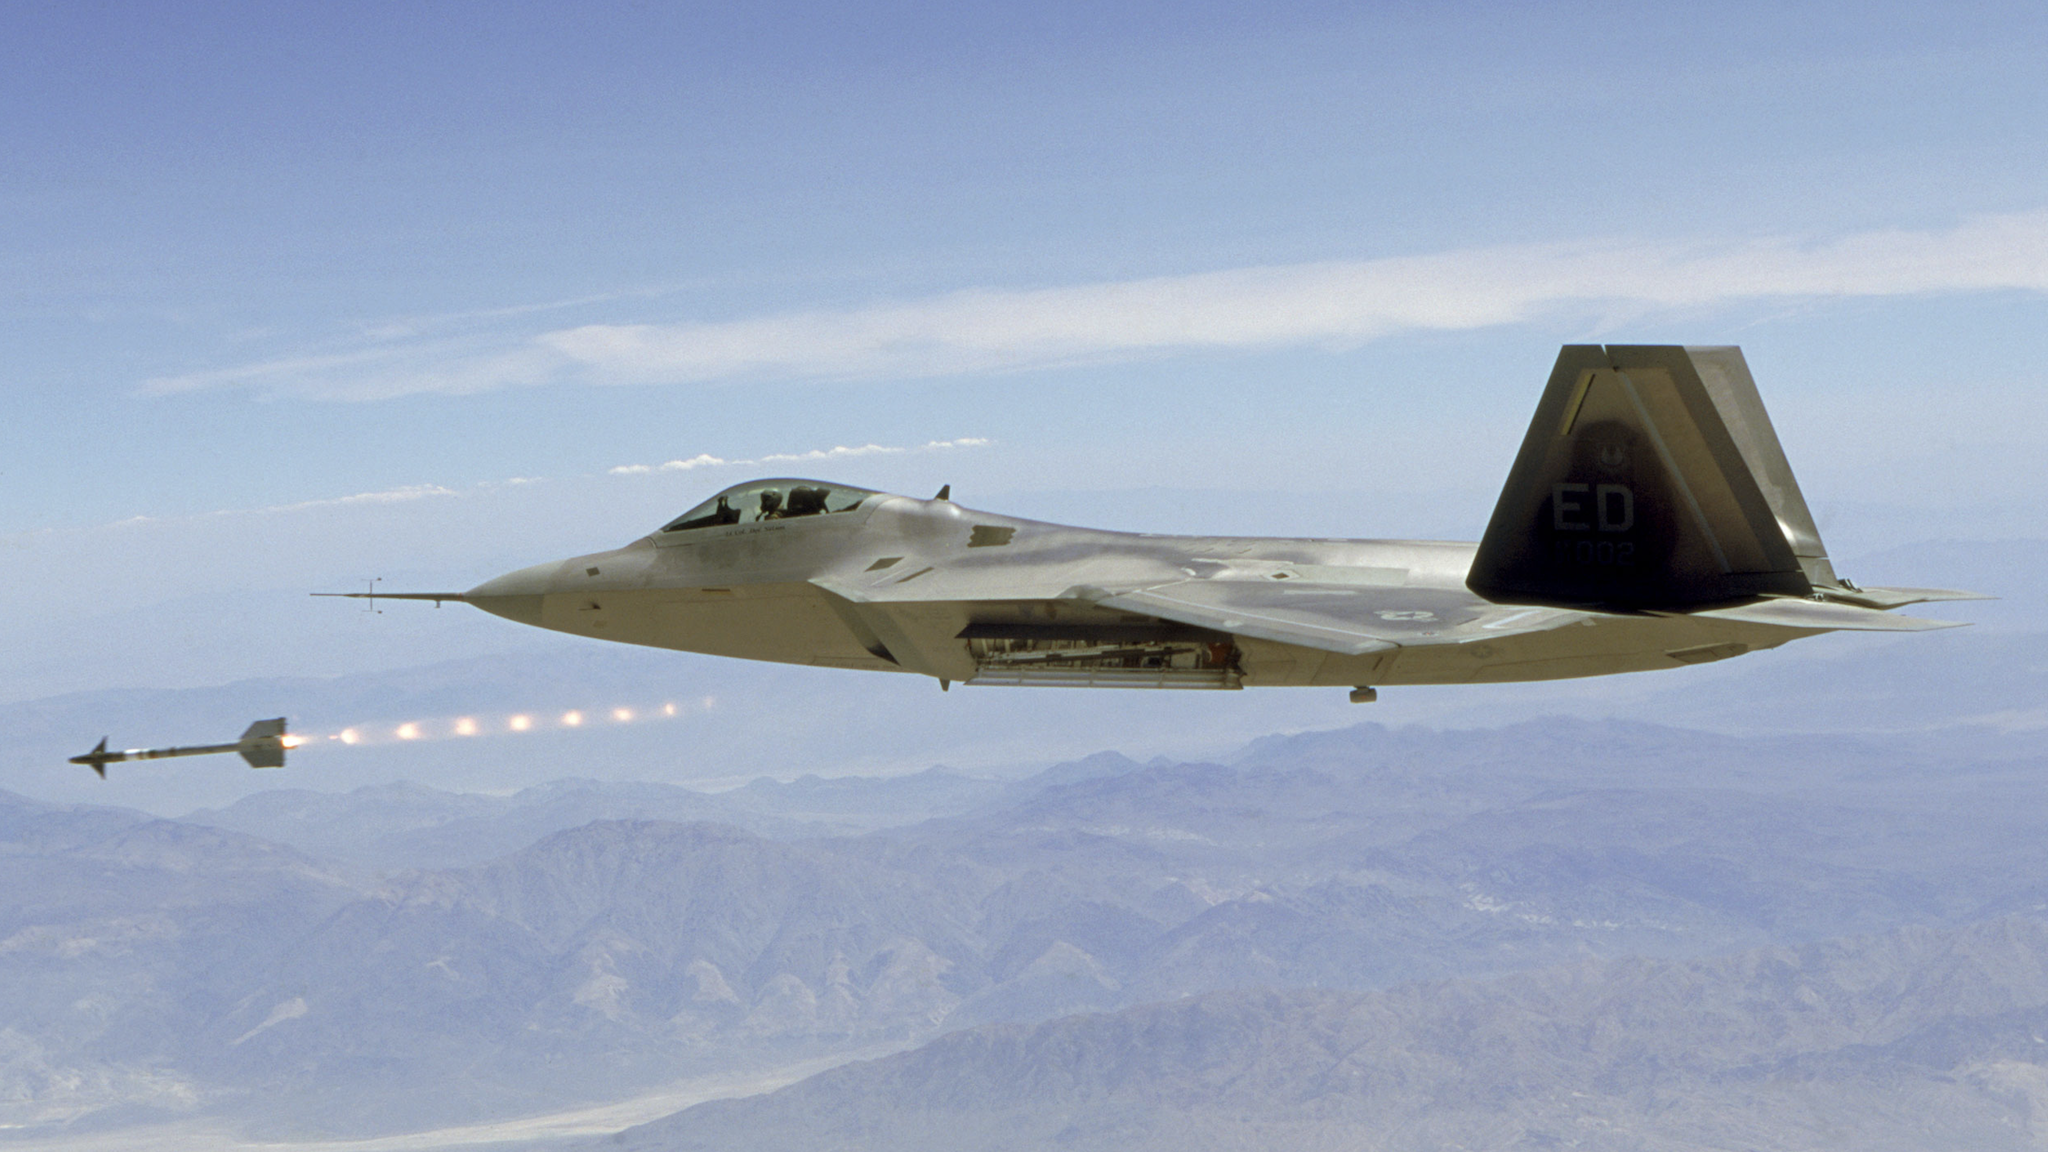 UNITED STATES - 2001: The F-22 Raptor. It is the US Air Force's next generation air dominance fighter being designed and manufactured under a joint project funded by numerious defense contractors and foreign governments.